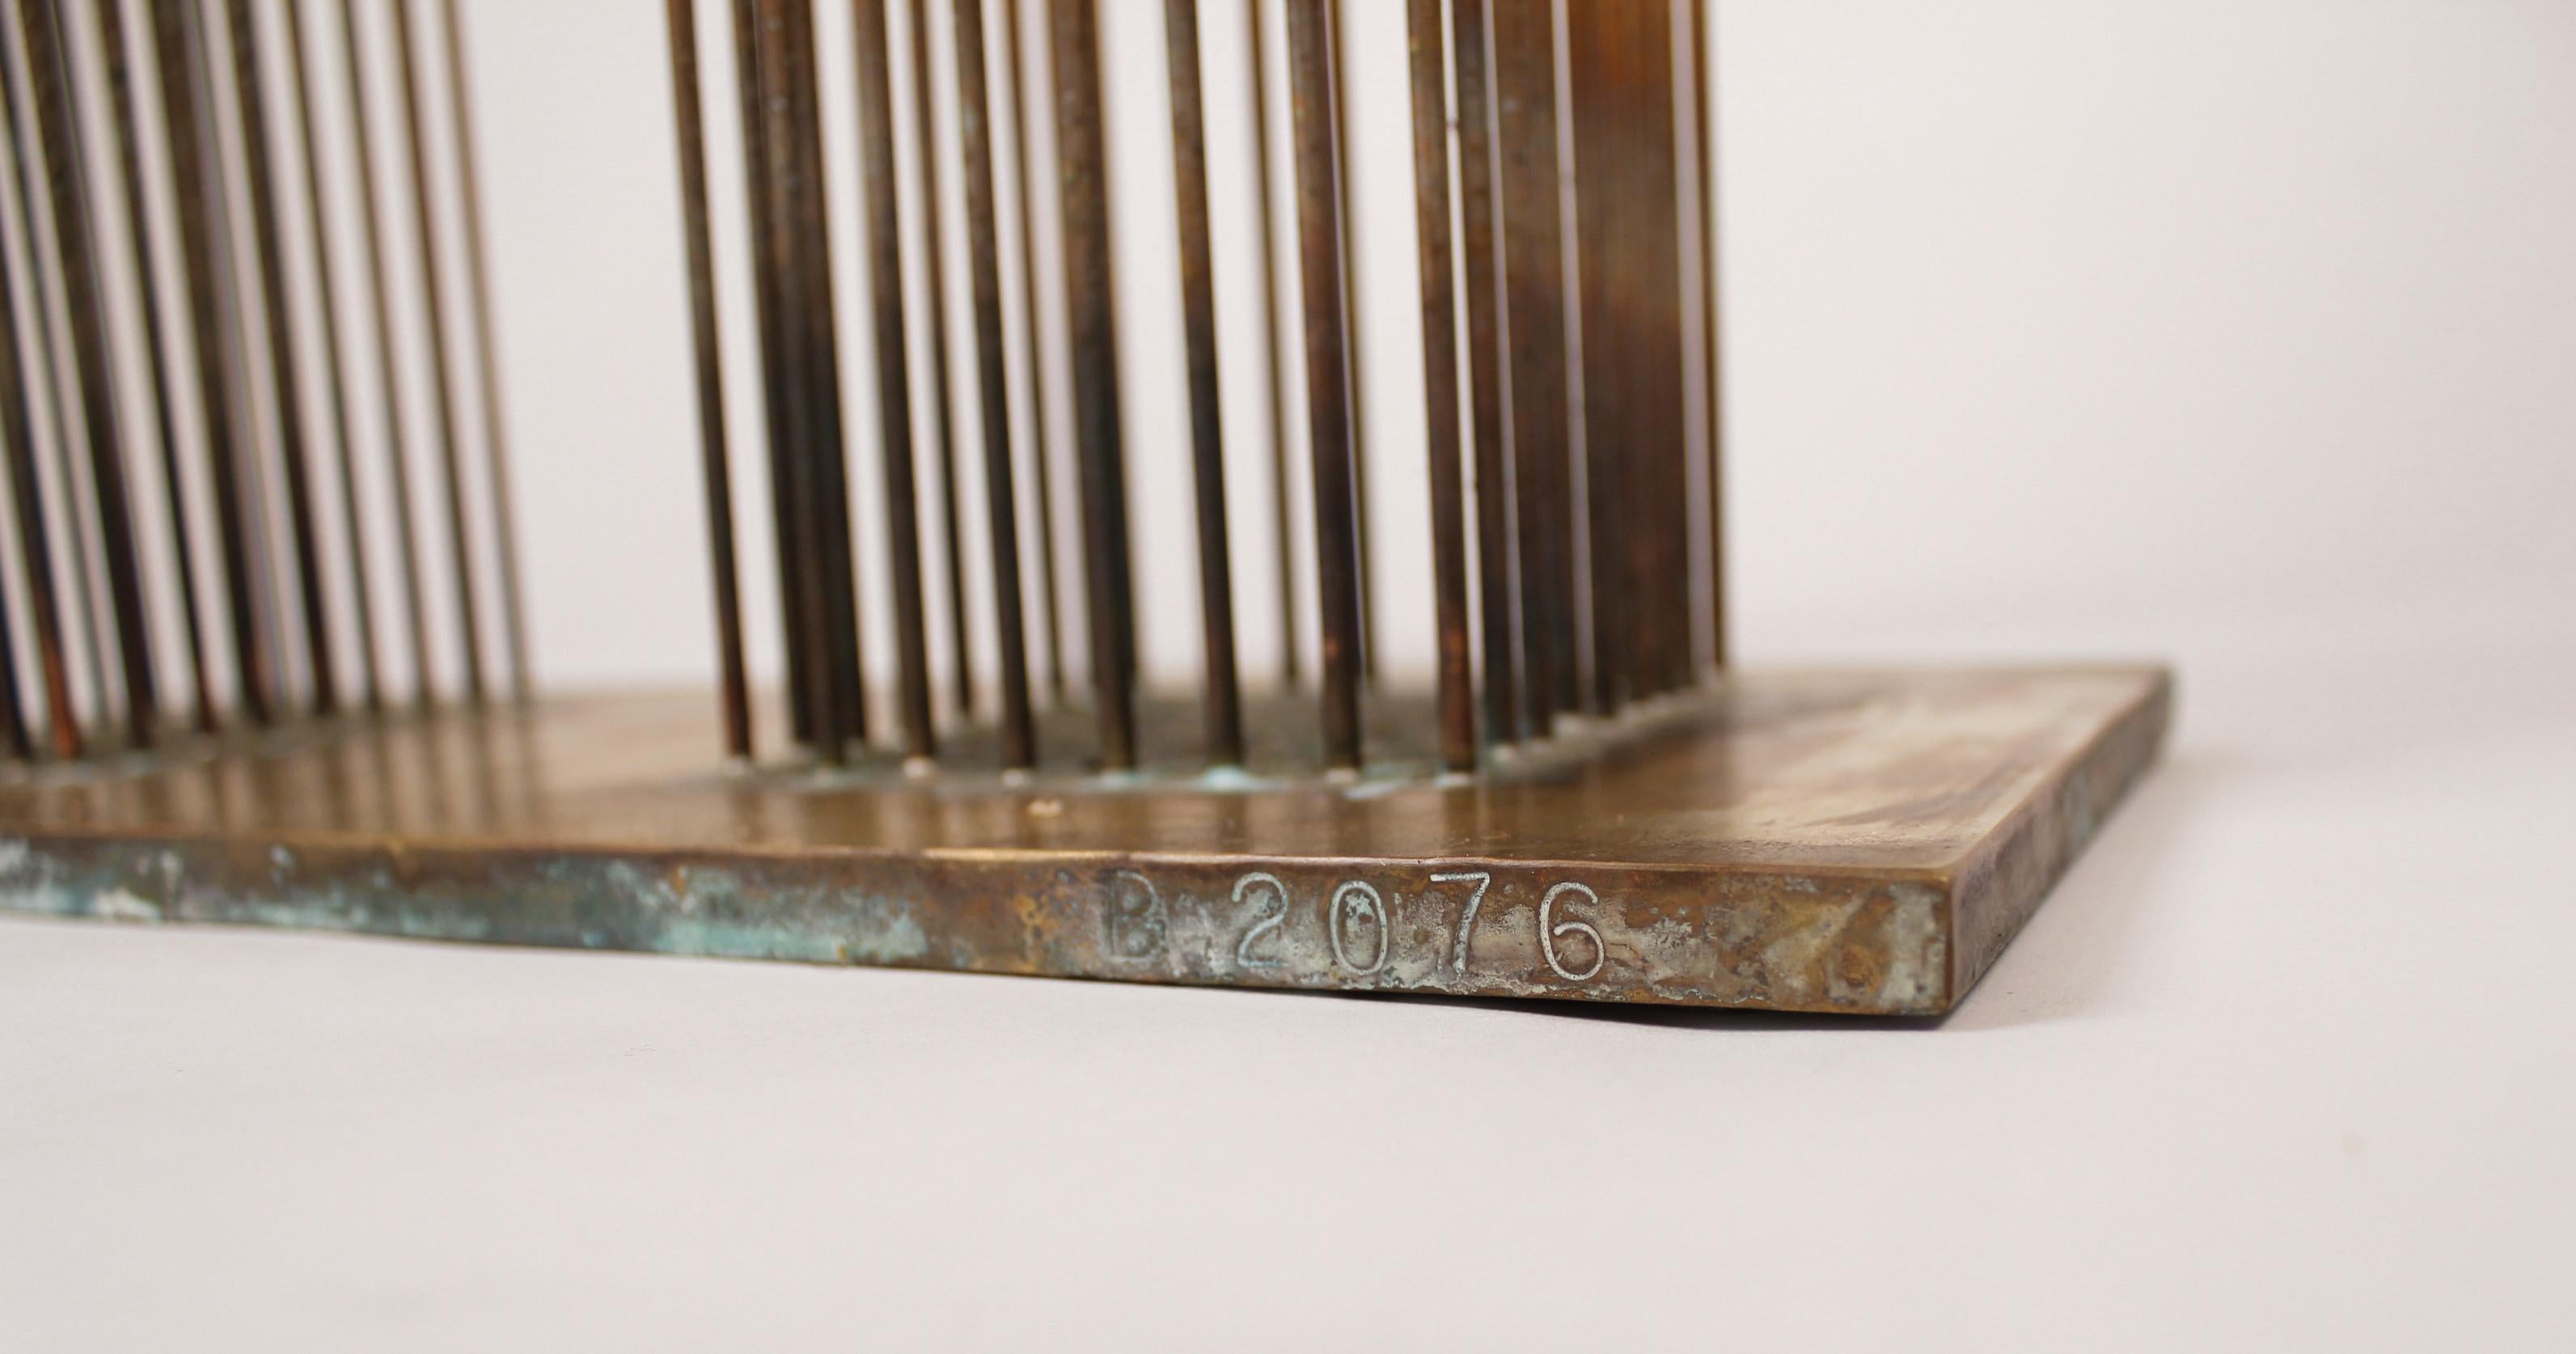 American Brass and Beryllium Copper Sonambinet Sounding Sculpture by Val Bertoia For Sale